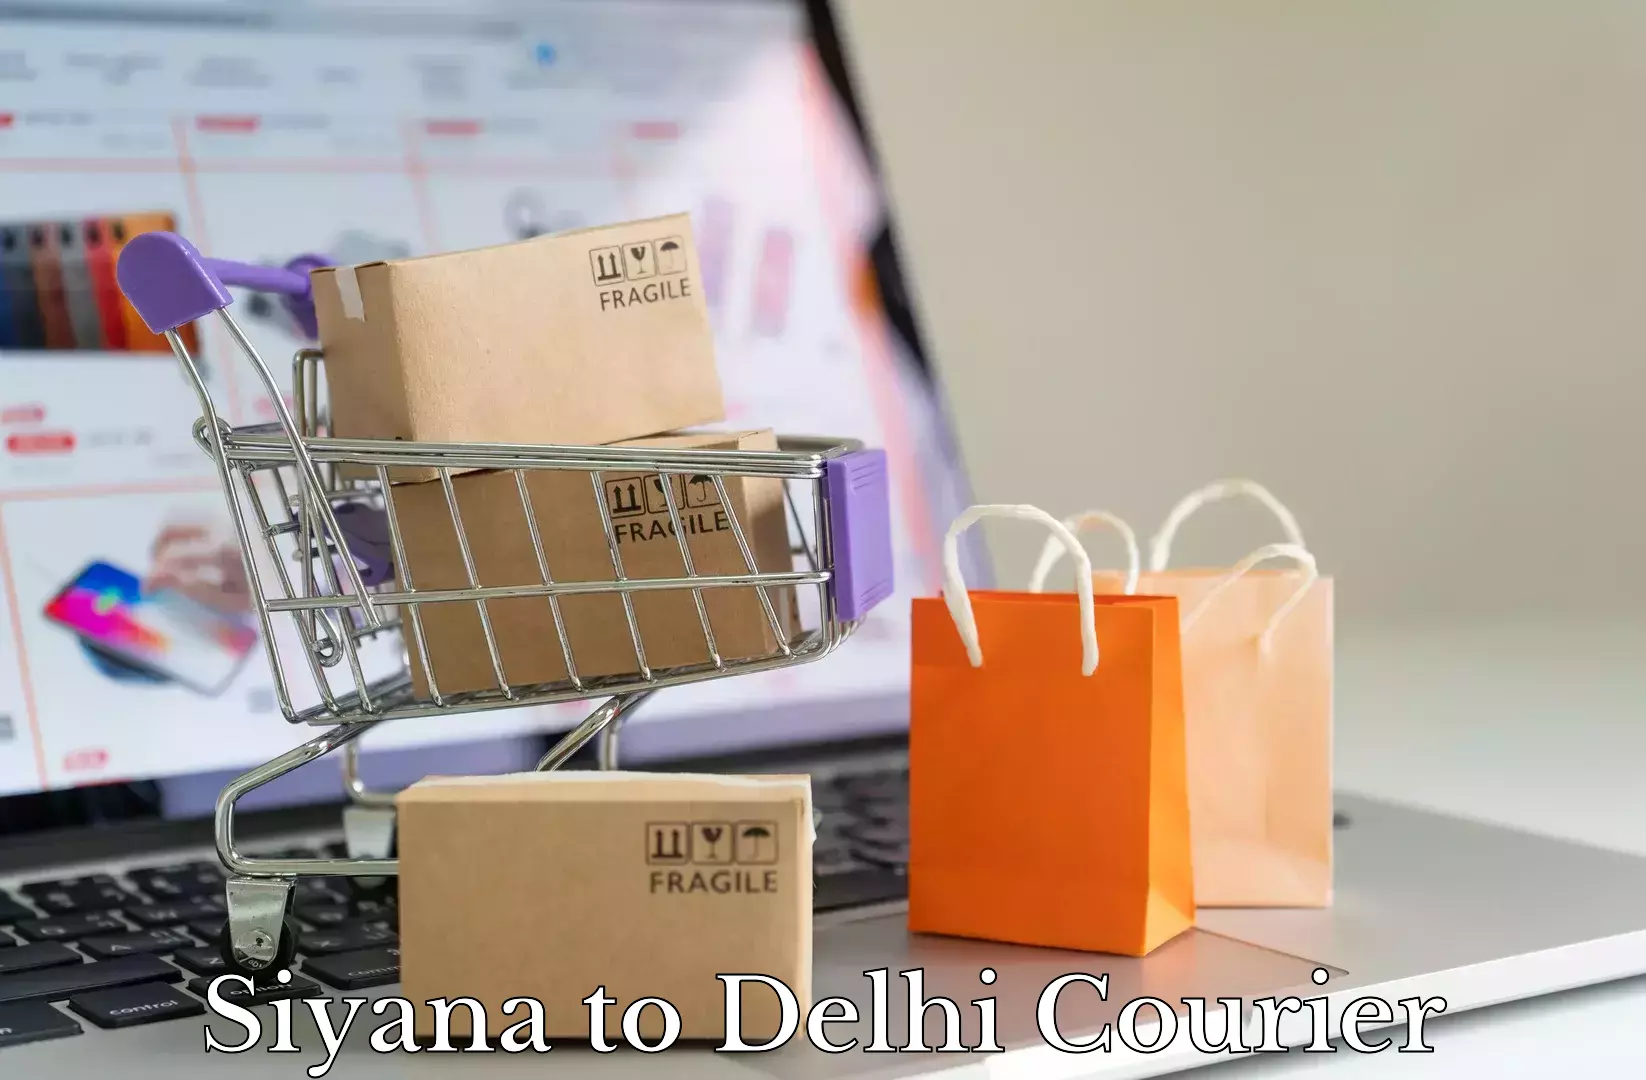 Quality relocation services in Siyana to Delhi